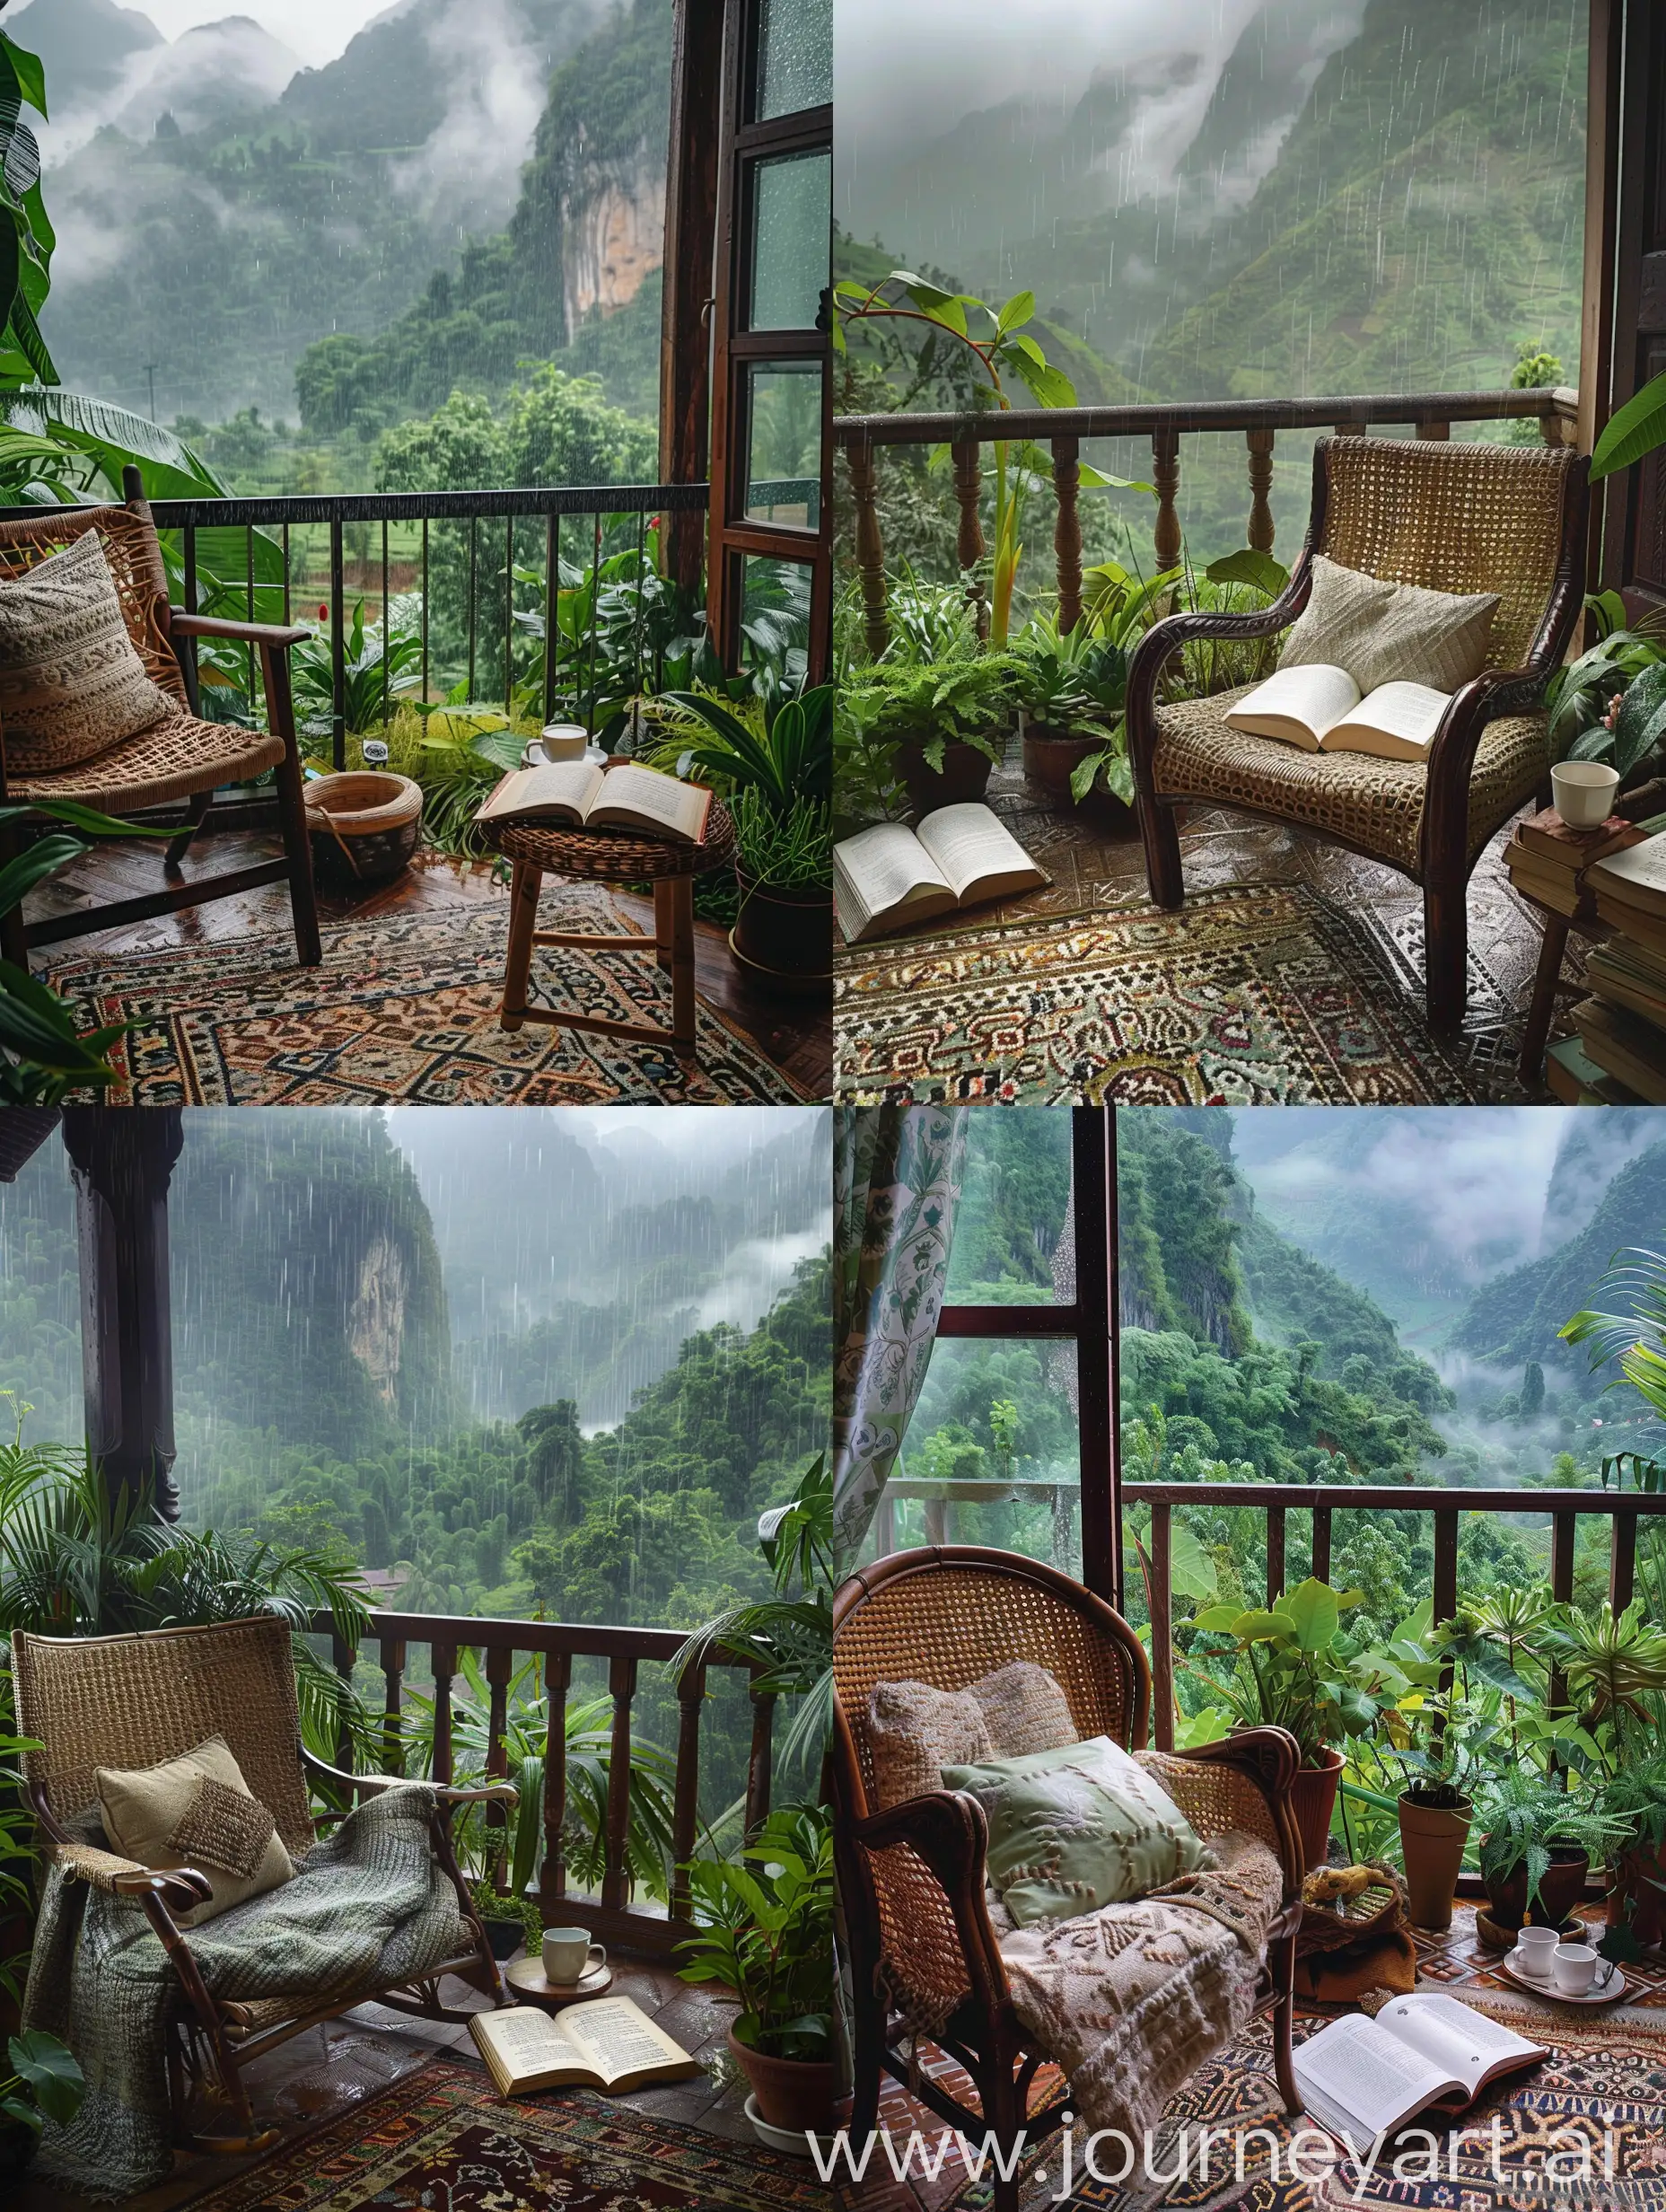 A room located in a lush mountain forest. , the room features a chair with a woven back and arms, and a throw pillow on top. An open book and a coffee cup lie on a small wooden table, and a traditional patterned rug covers the floor. The room has a large window open, and outside the window is a view of lush green vegetation and mist-shrouded mountains. , it is raining lightly outside, and the balcony is filled with various green plants and flowers,